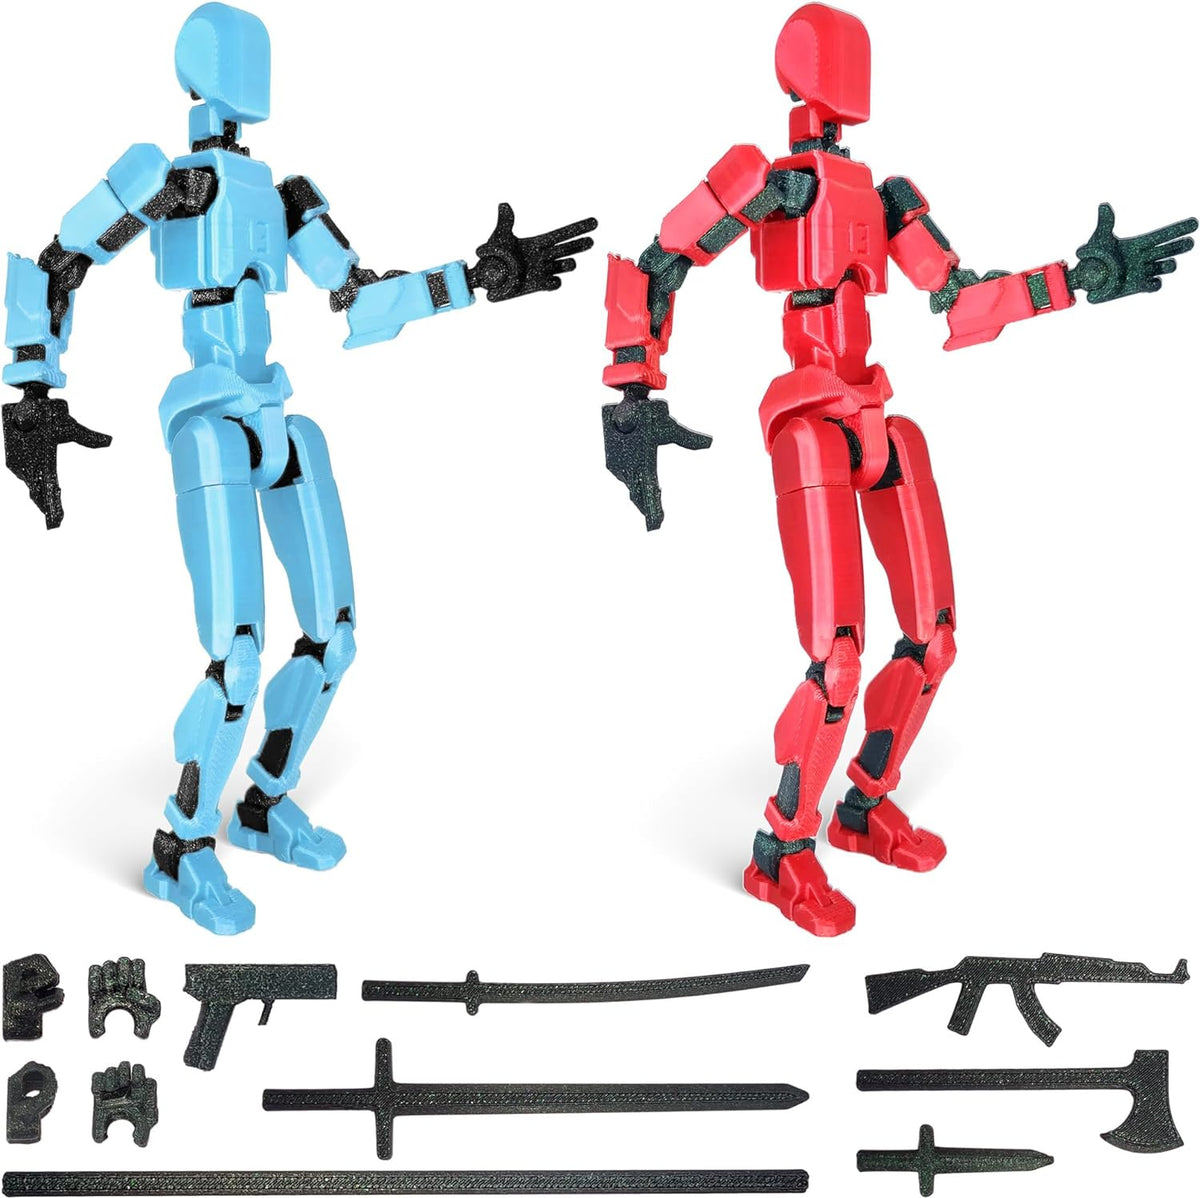 3D Printed Action Figure, Robot Toys with Full Articulation for Stop Motion Animation(2 pcs, Blue Red) Cykapu